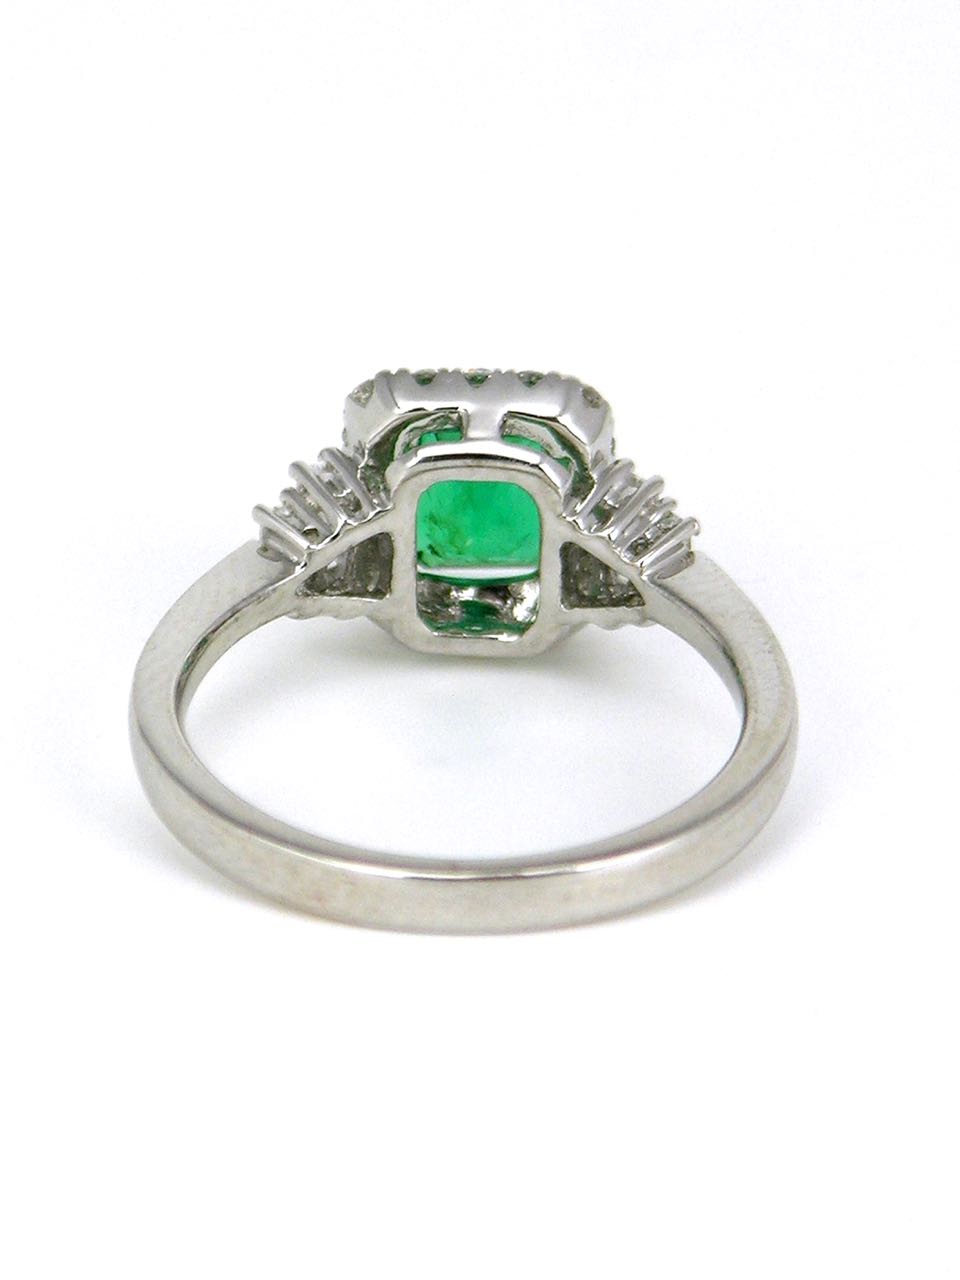 18k white gold emerald and diamond ring